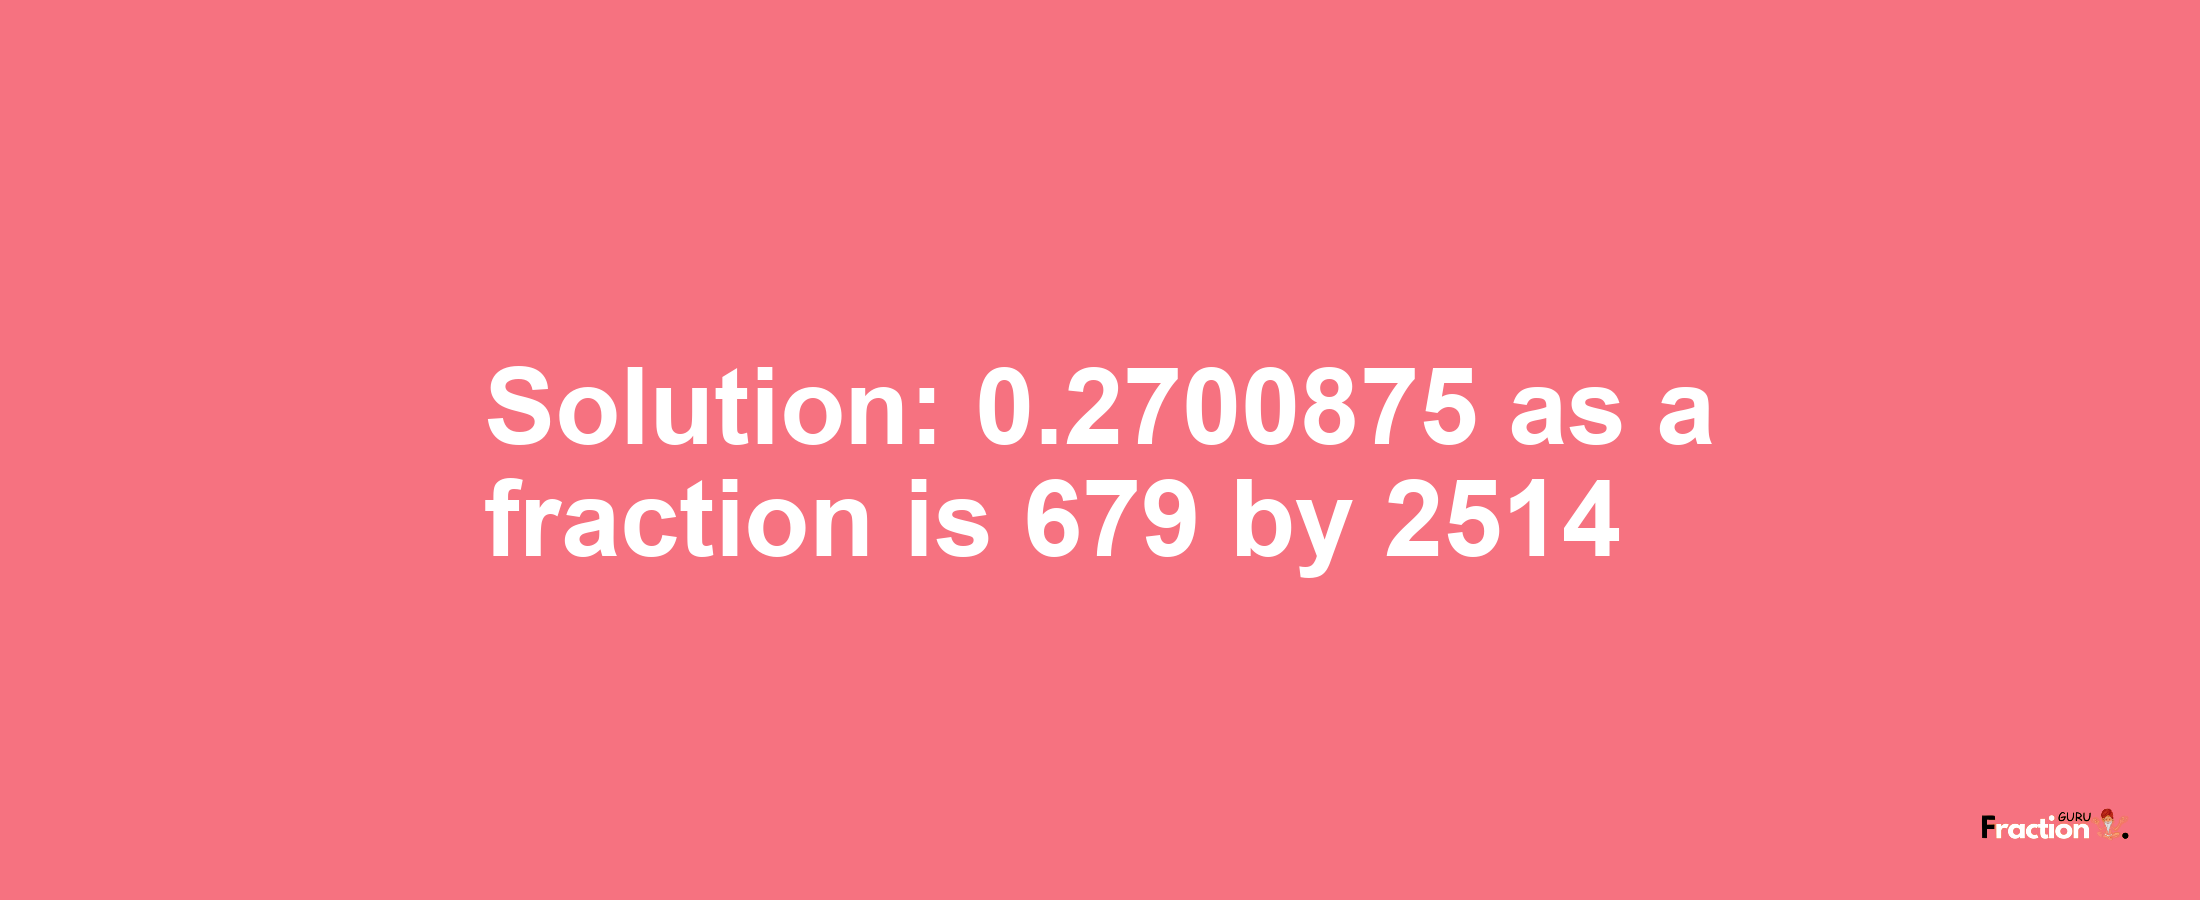 Solution:0.2700875 as a fraction is 679/2514